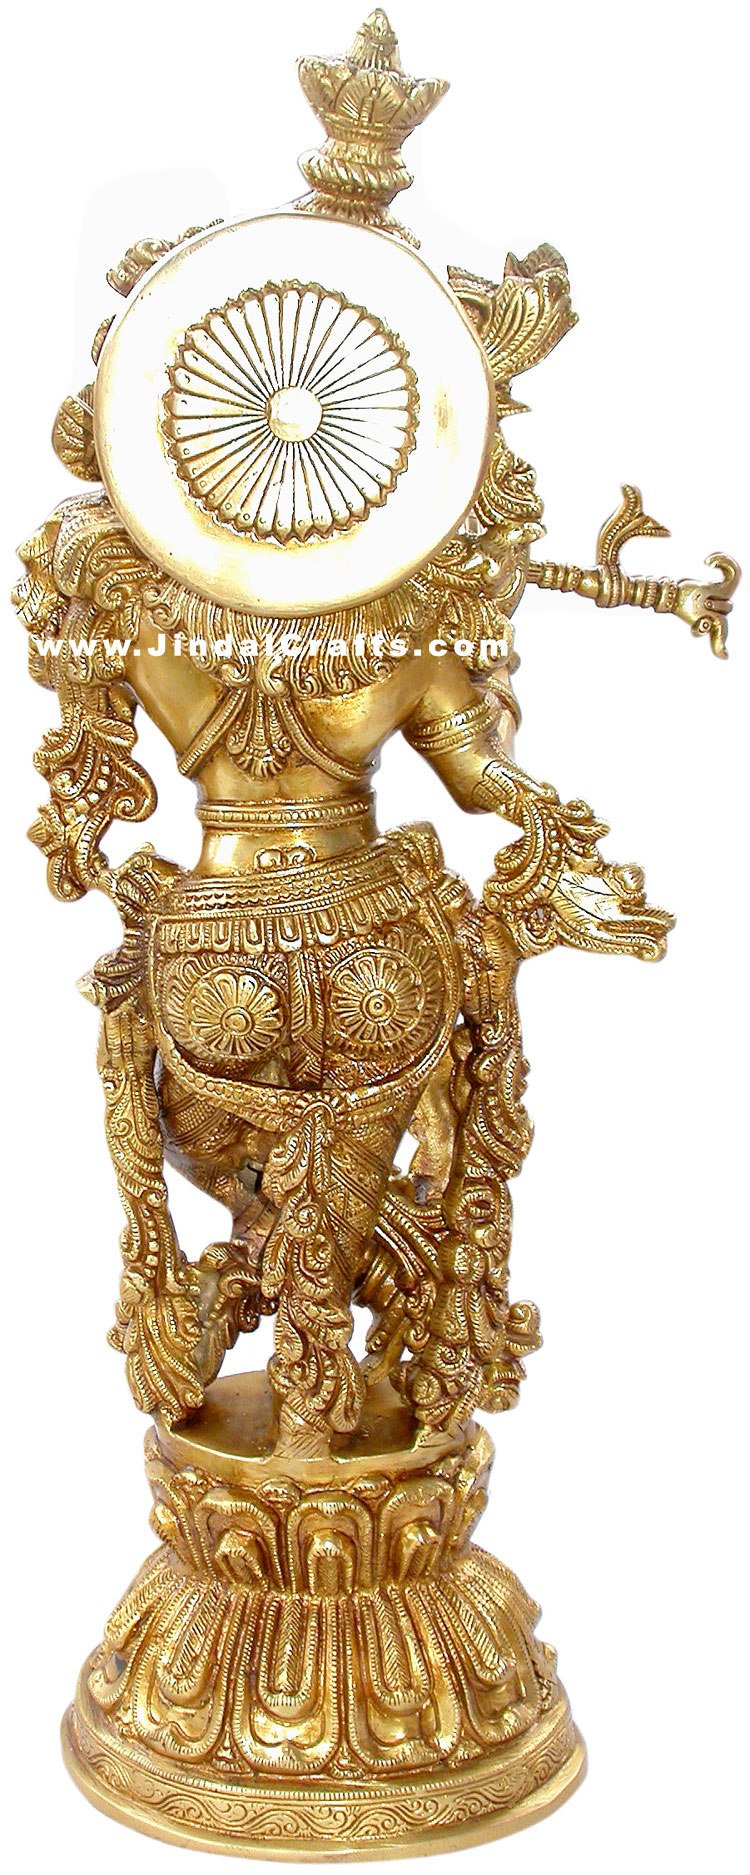 Lord Krishna Exclusive Piece of Brass Religious Statue Figurine Idol Collectible